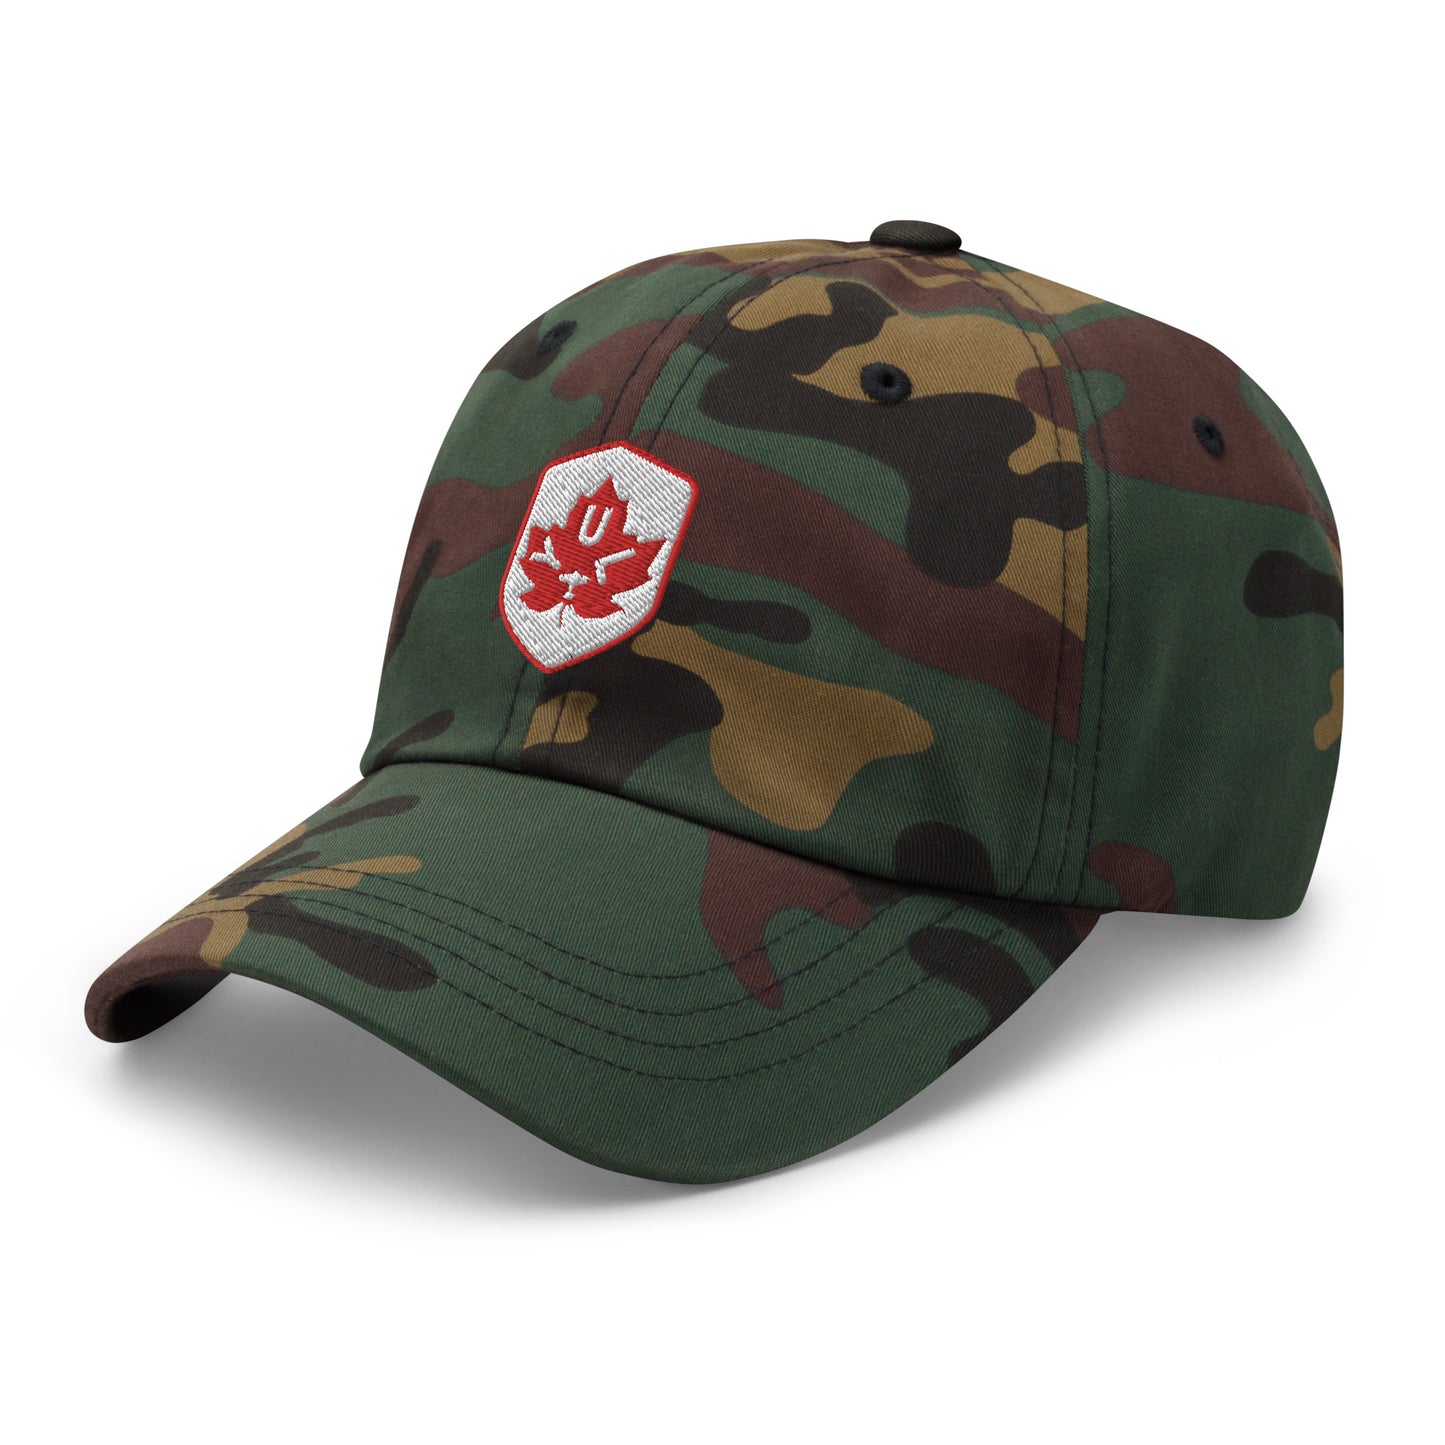 Maple Leaf Baseball Cap - Red/White • YUL Montreal • YHM Designs - Image 20